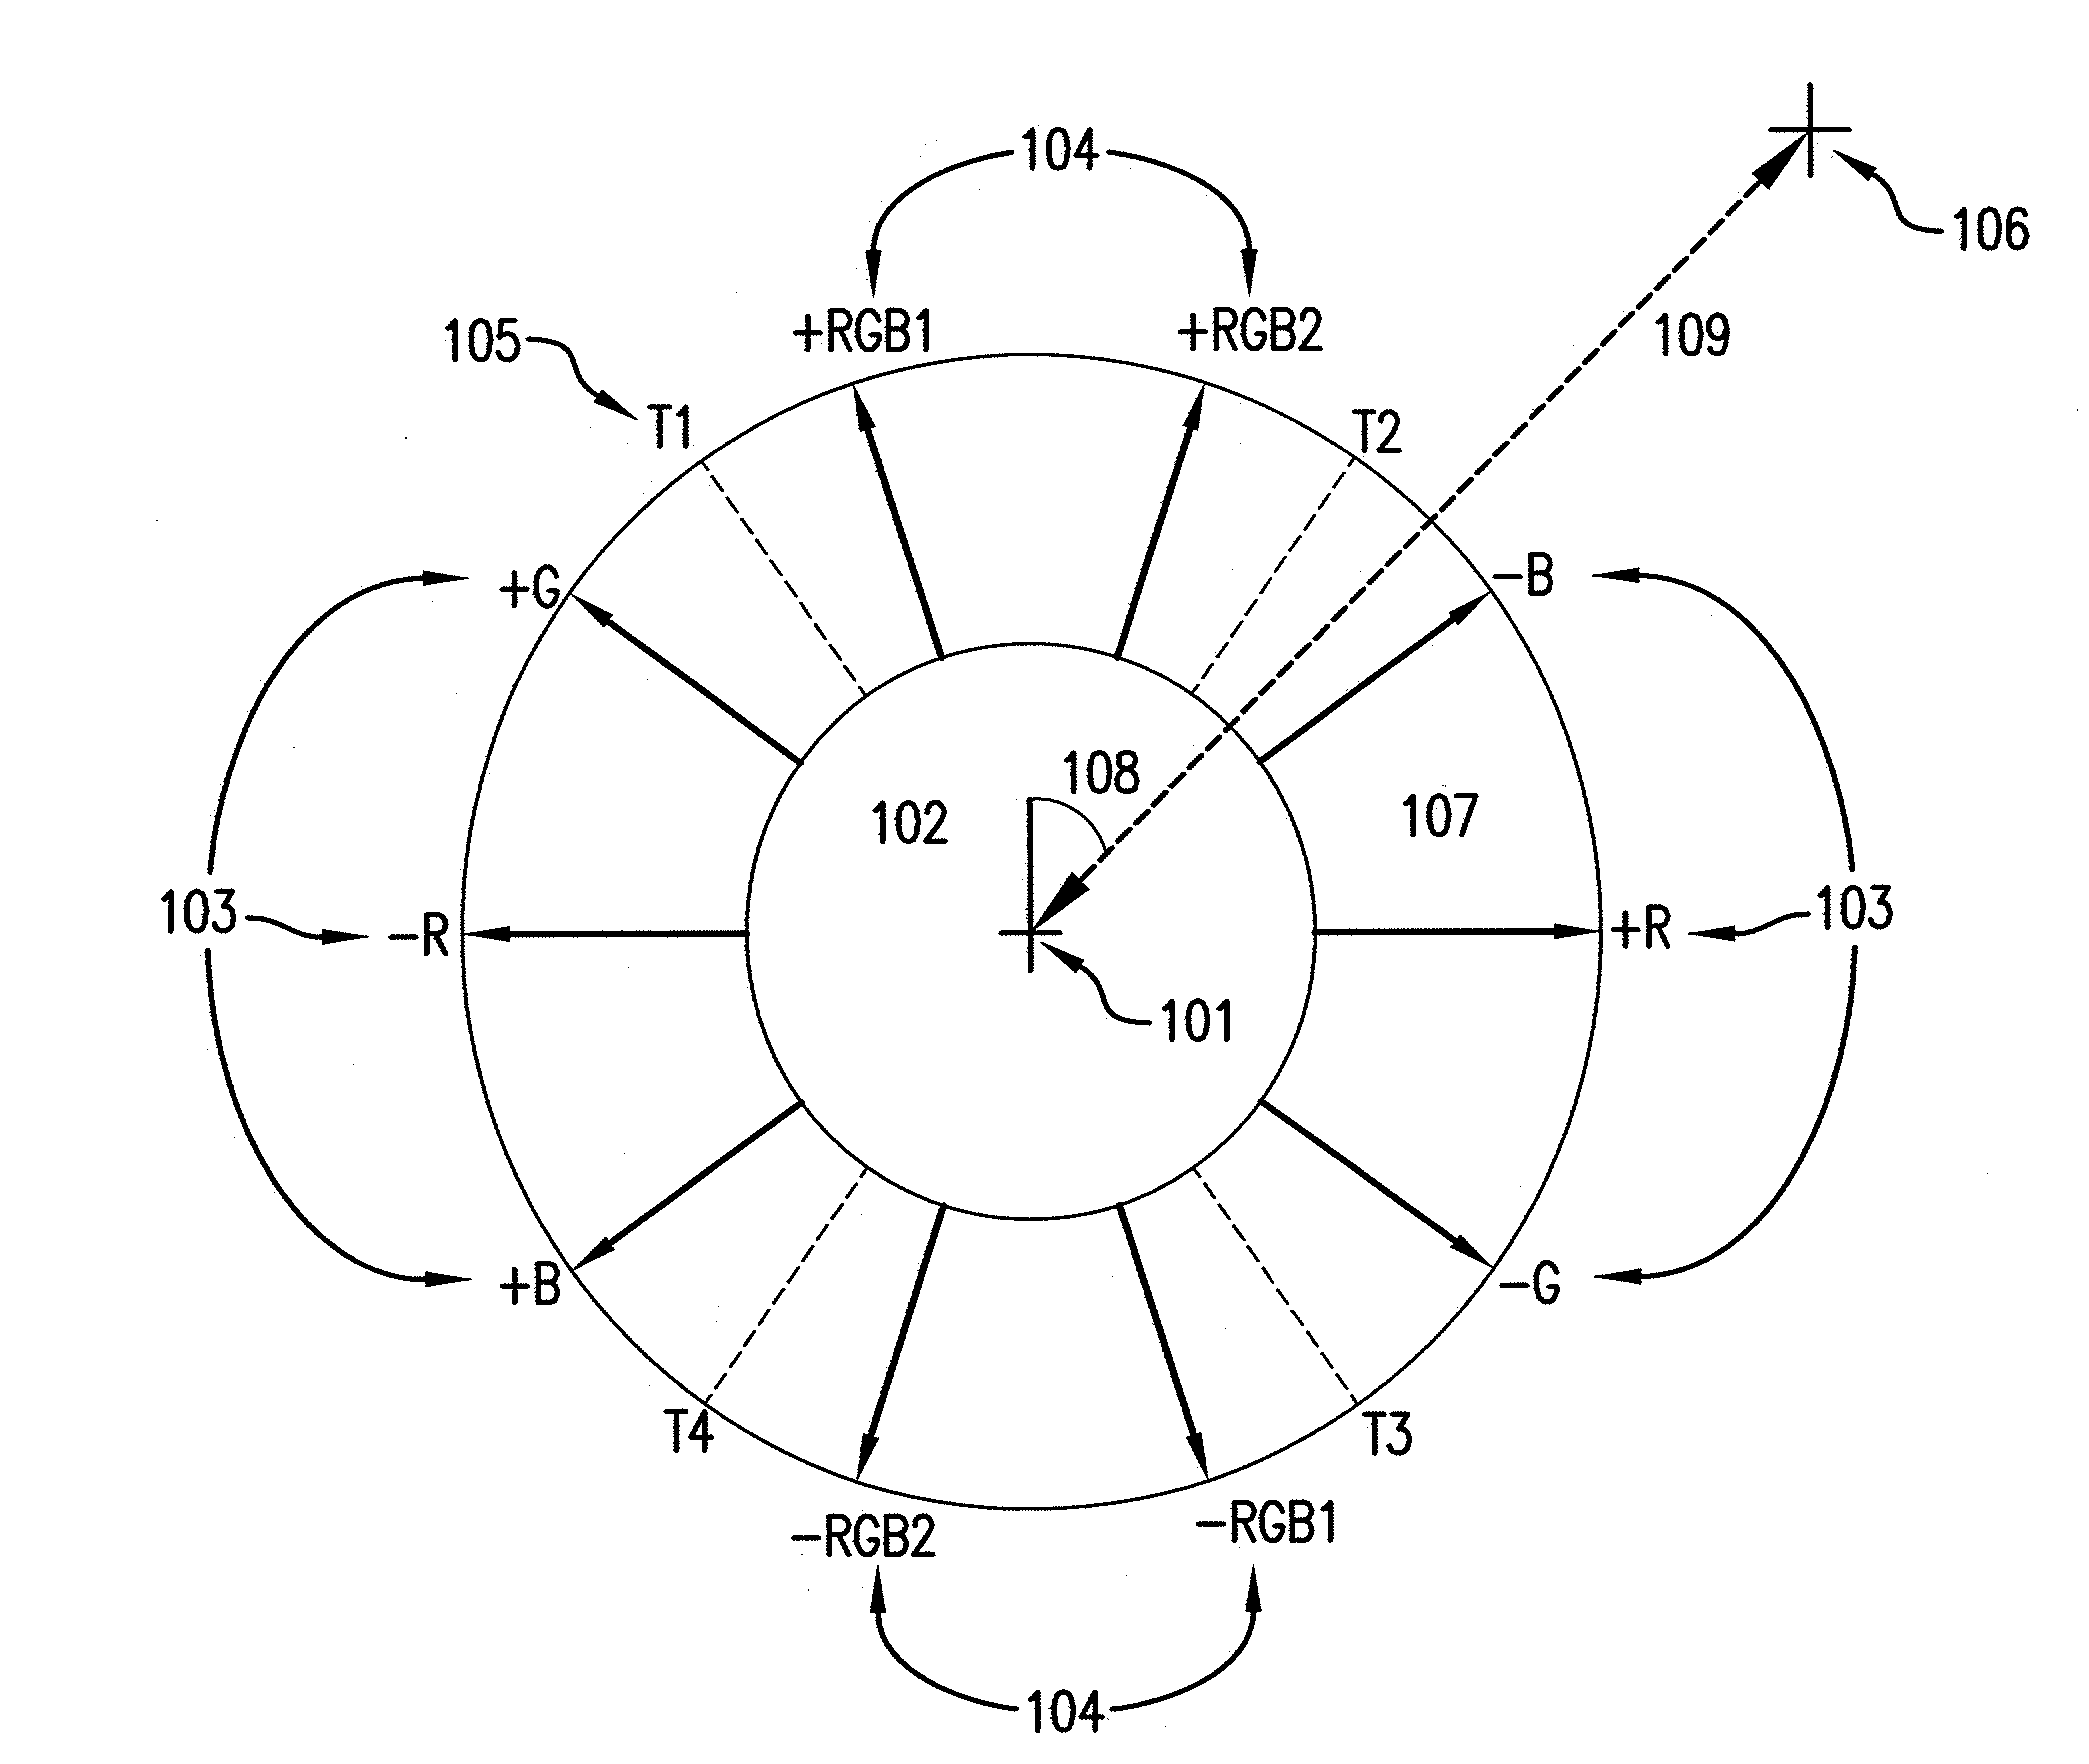 System, method and computer-accessible medium for manipulating a plurality of components using a single gesture or motion